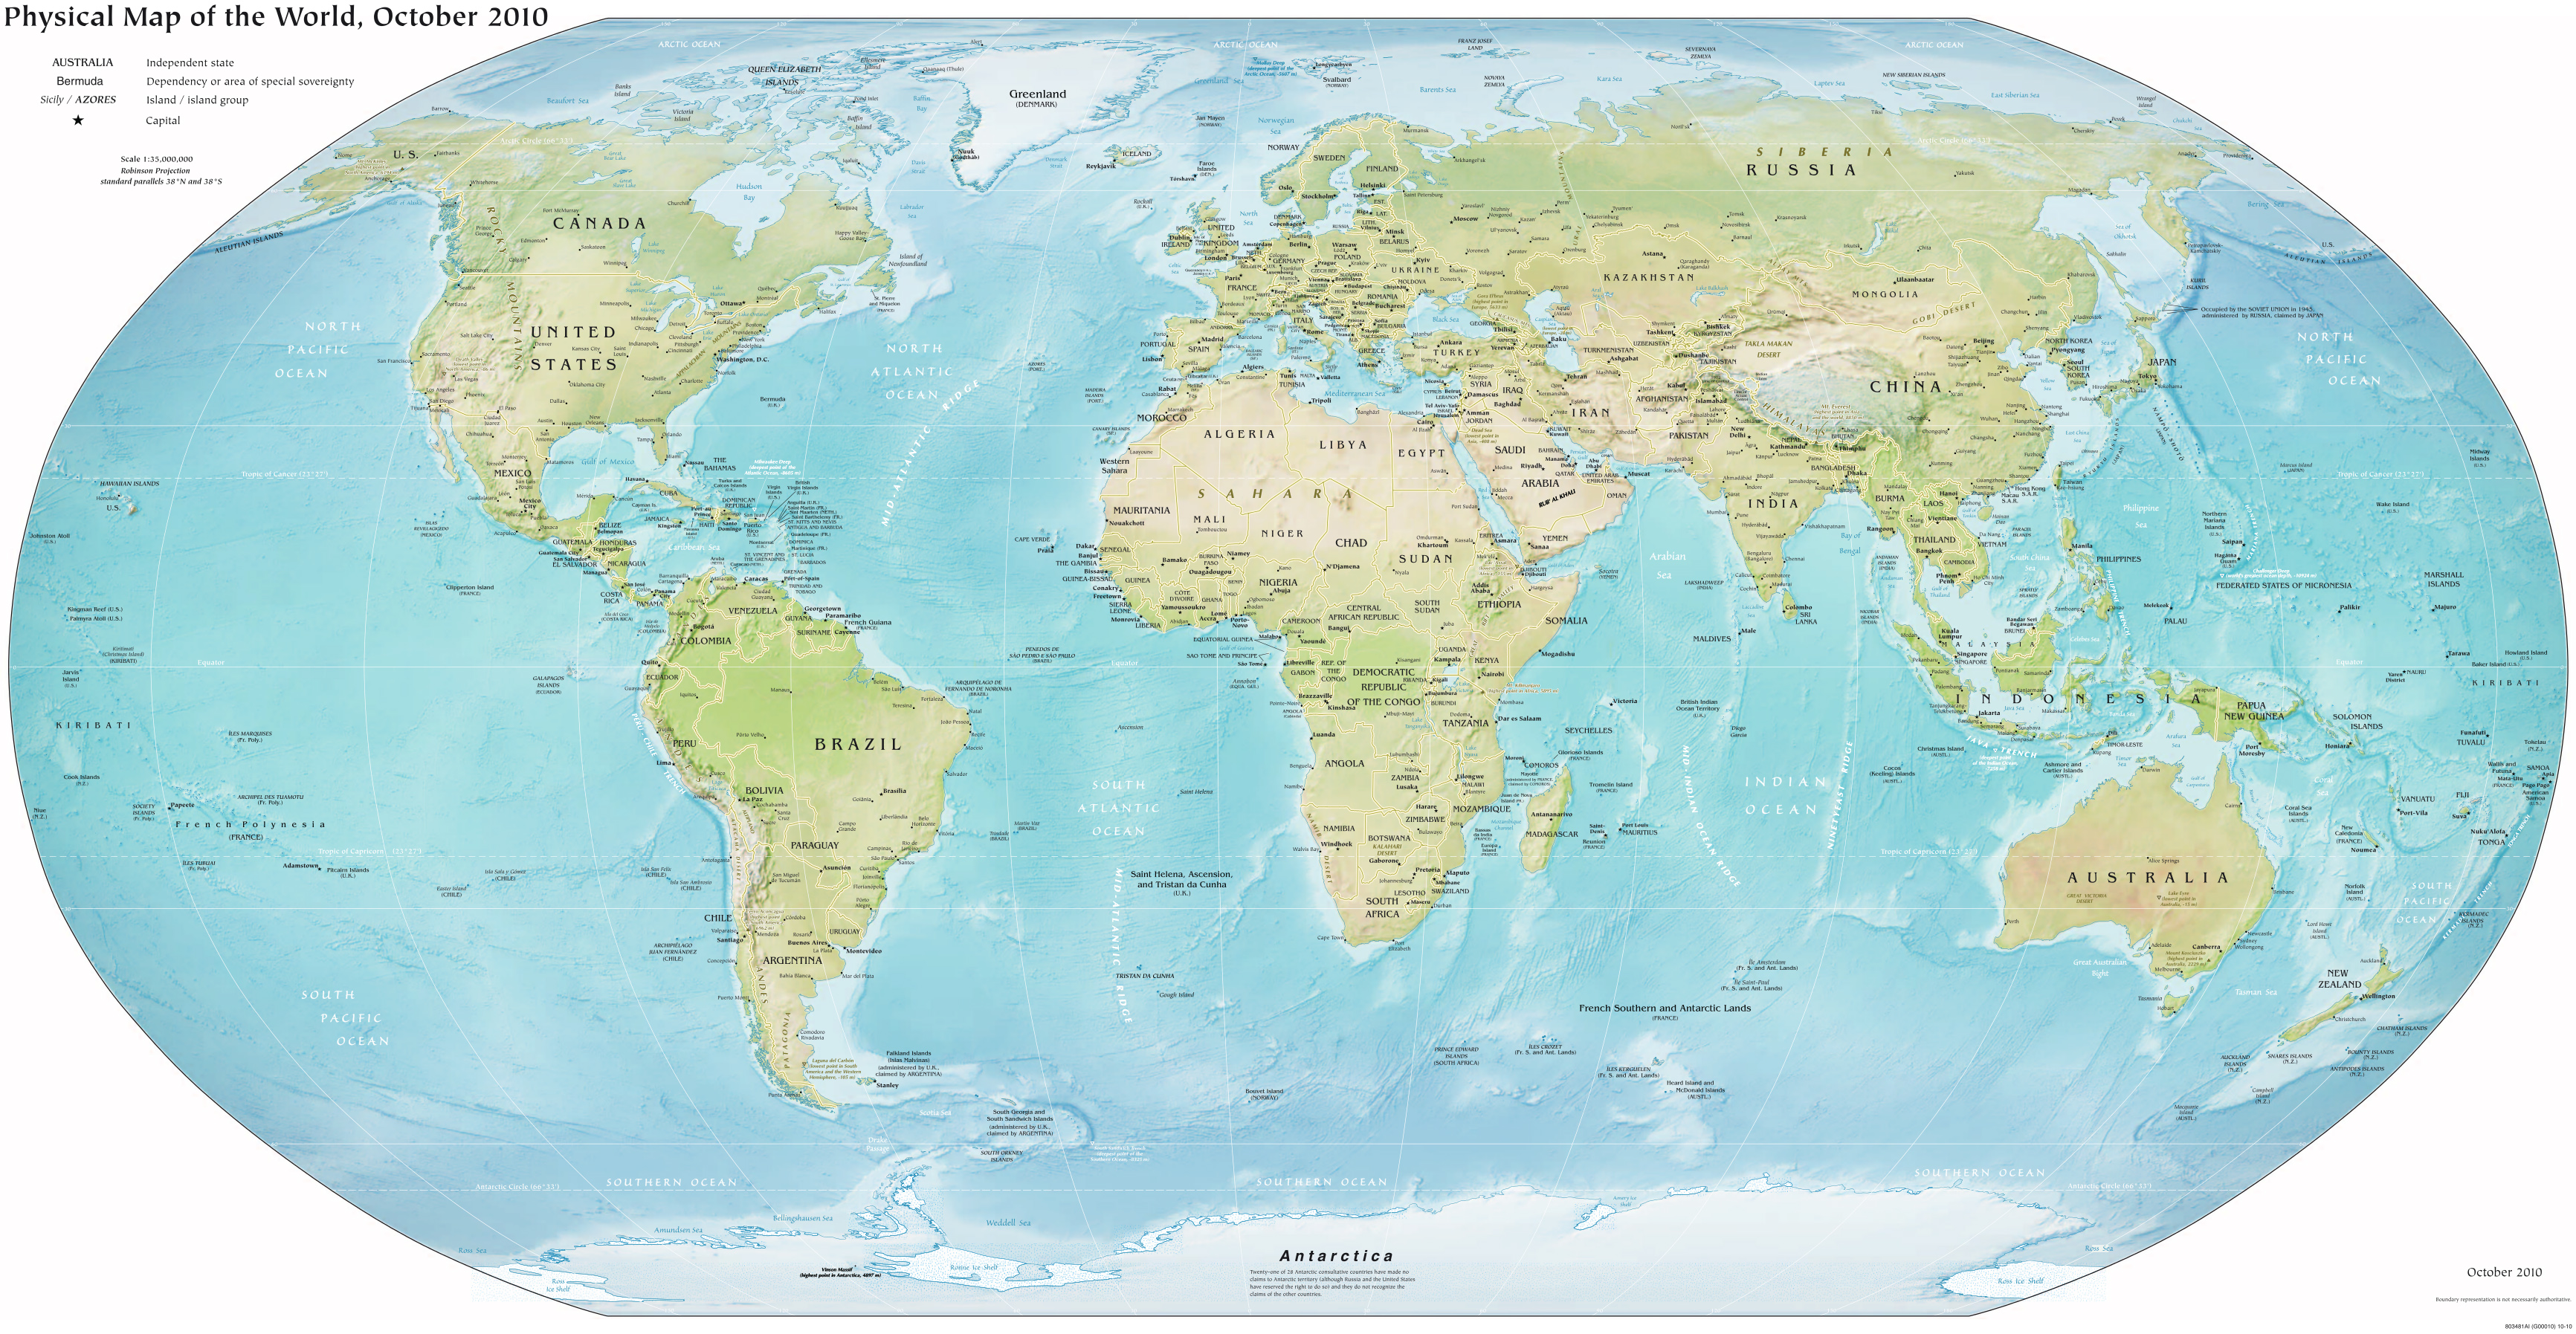 world-large-detailed-political-map-large-detailed-political-map-of-the